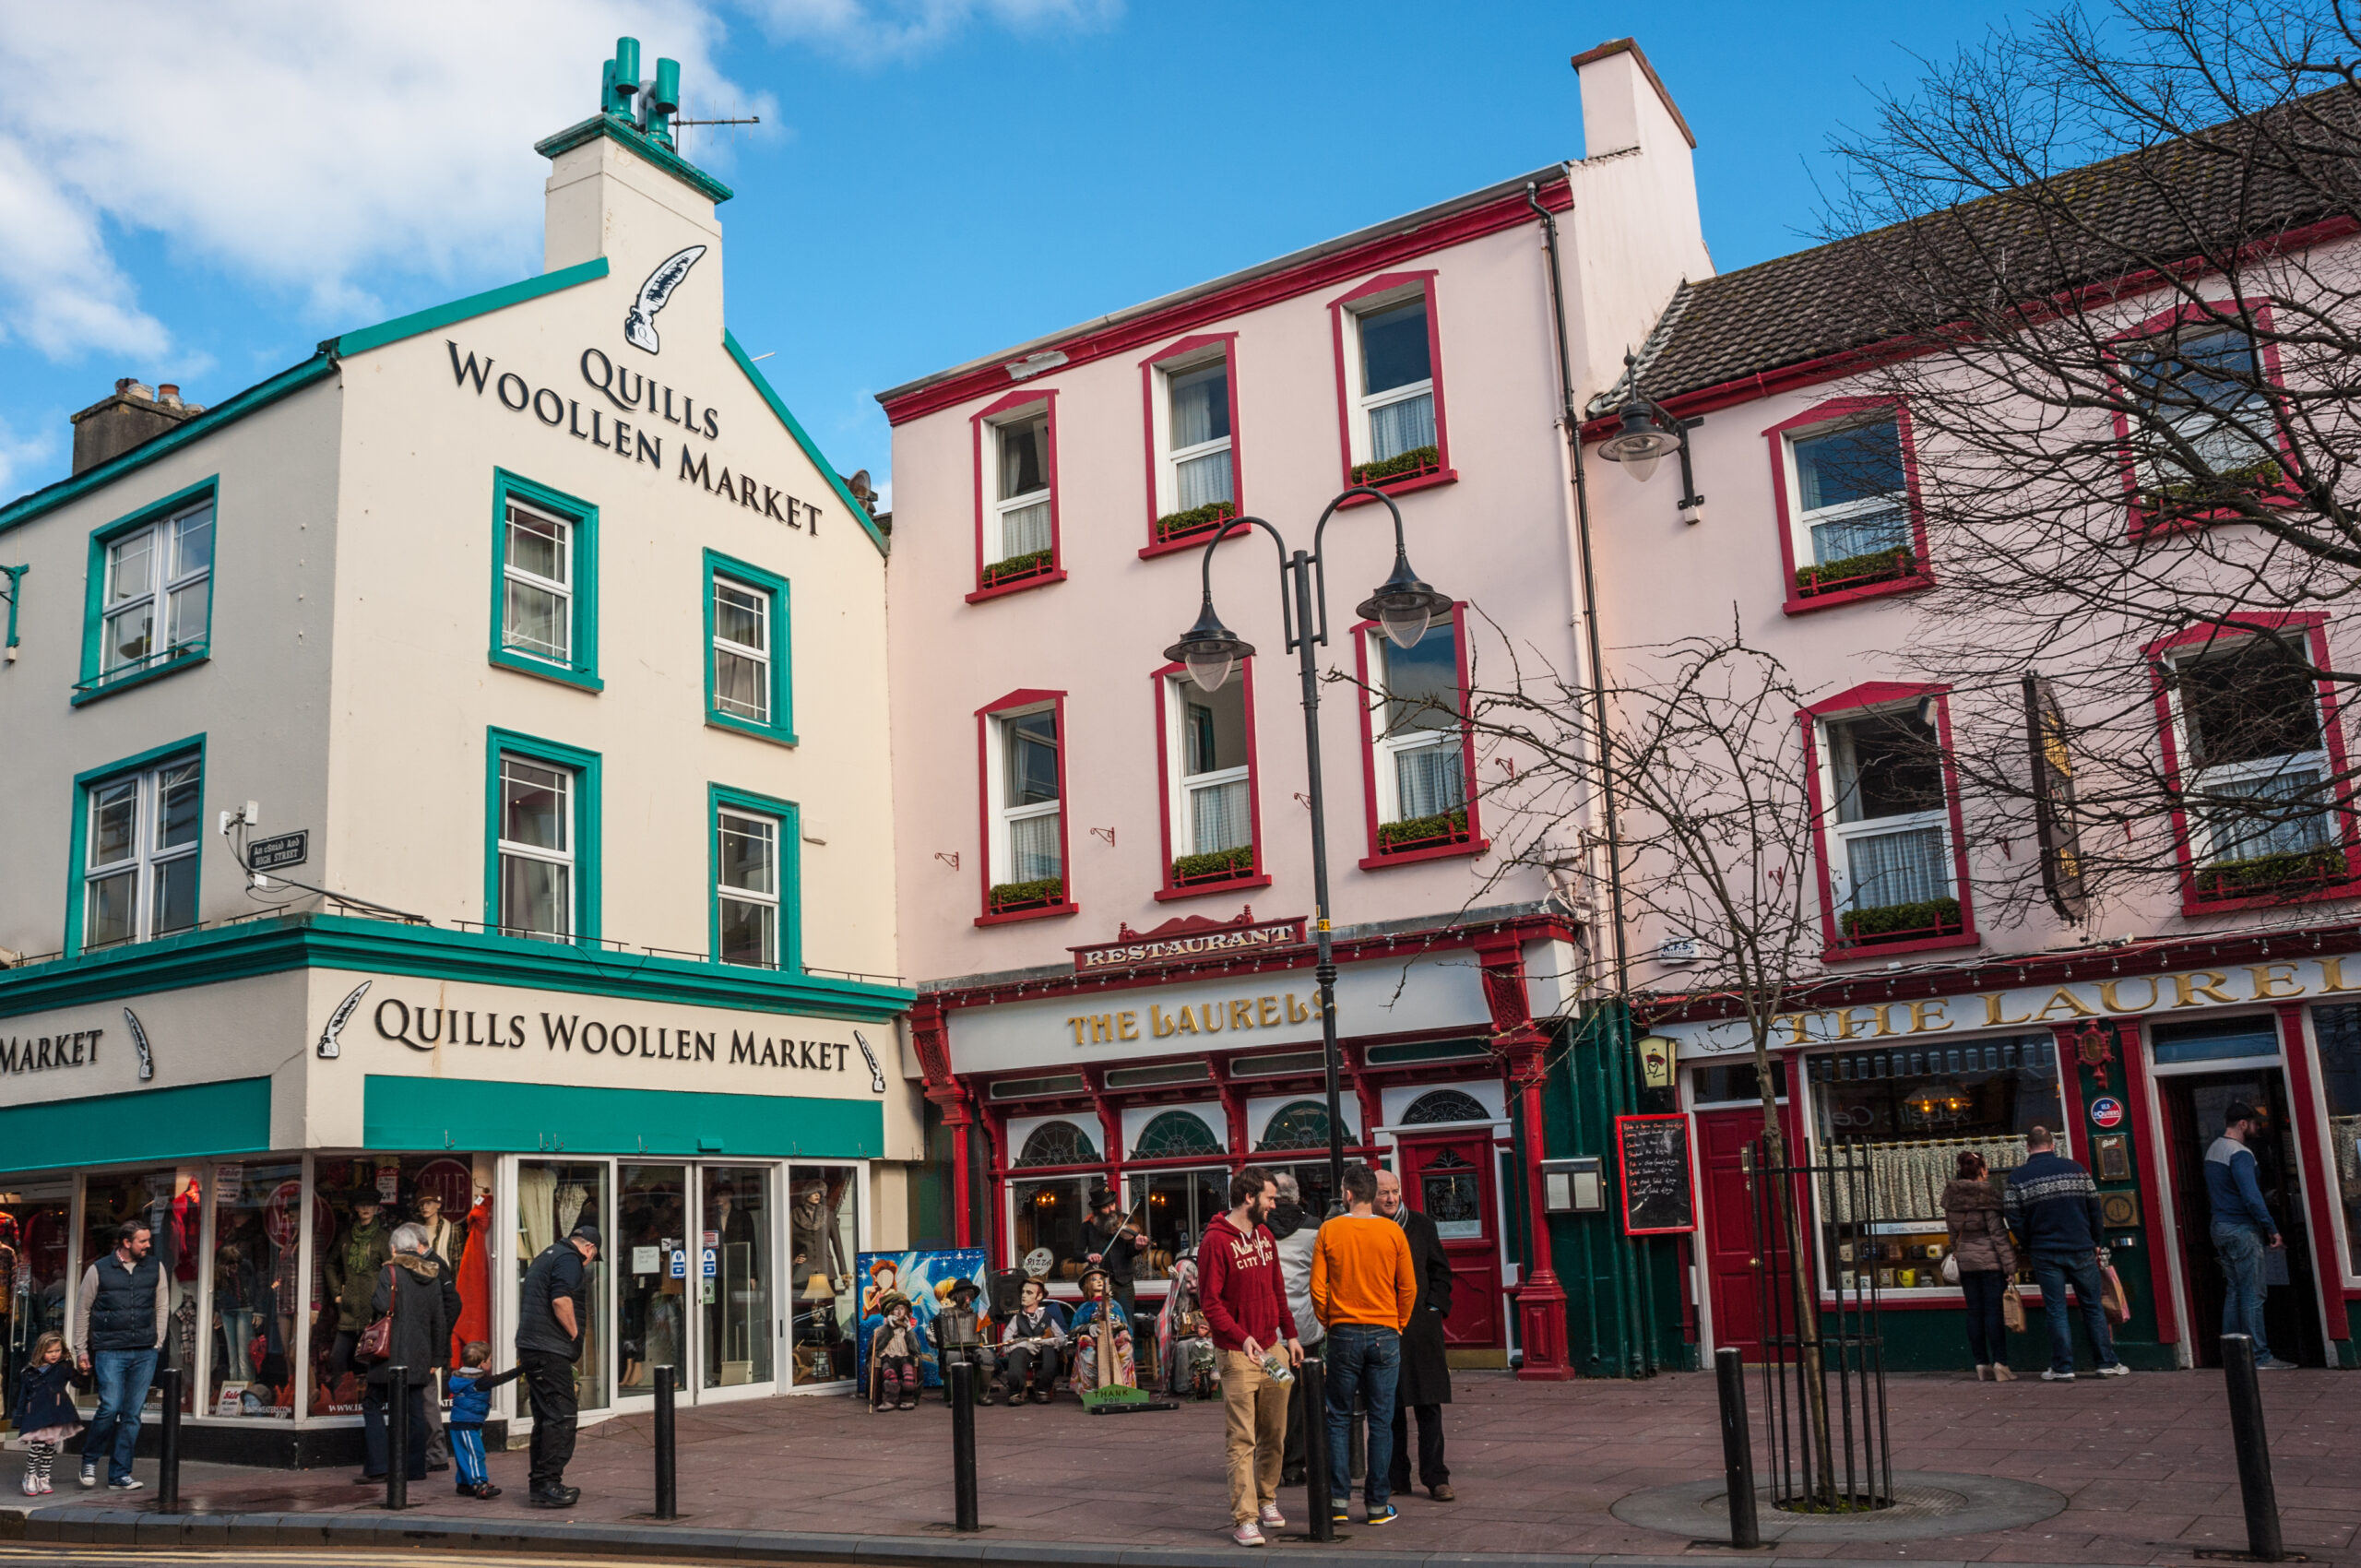 View of the colorful vintage inspired downtown of Killarney Ireland